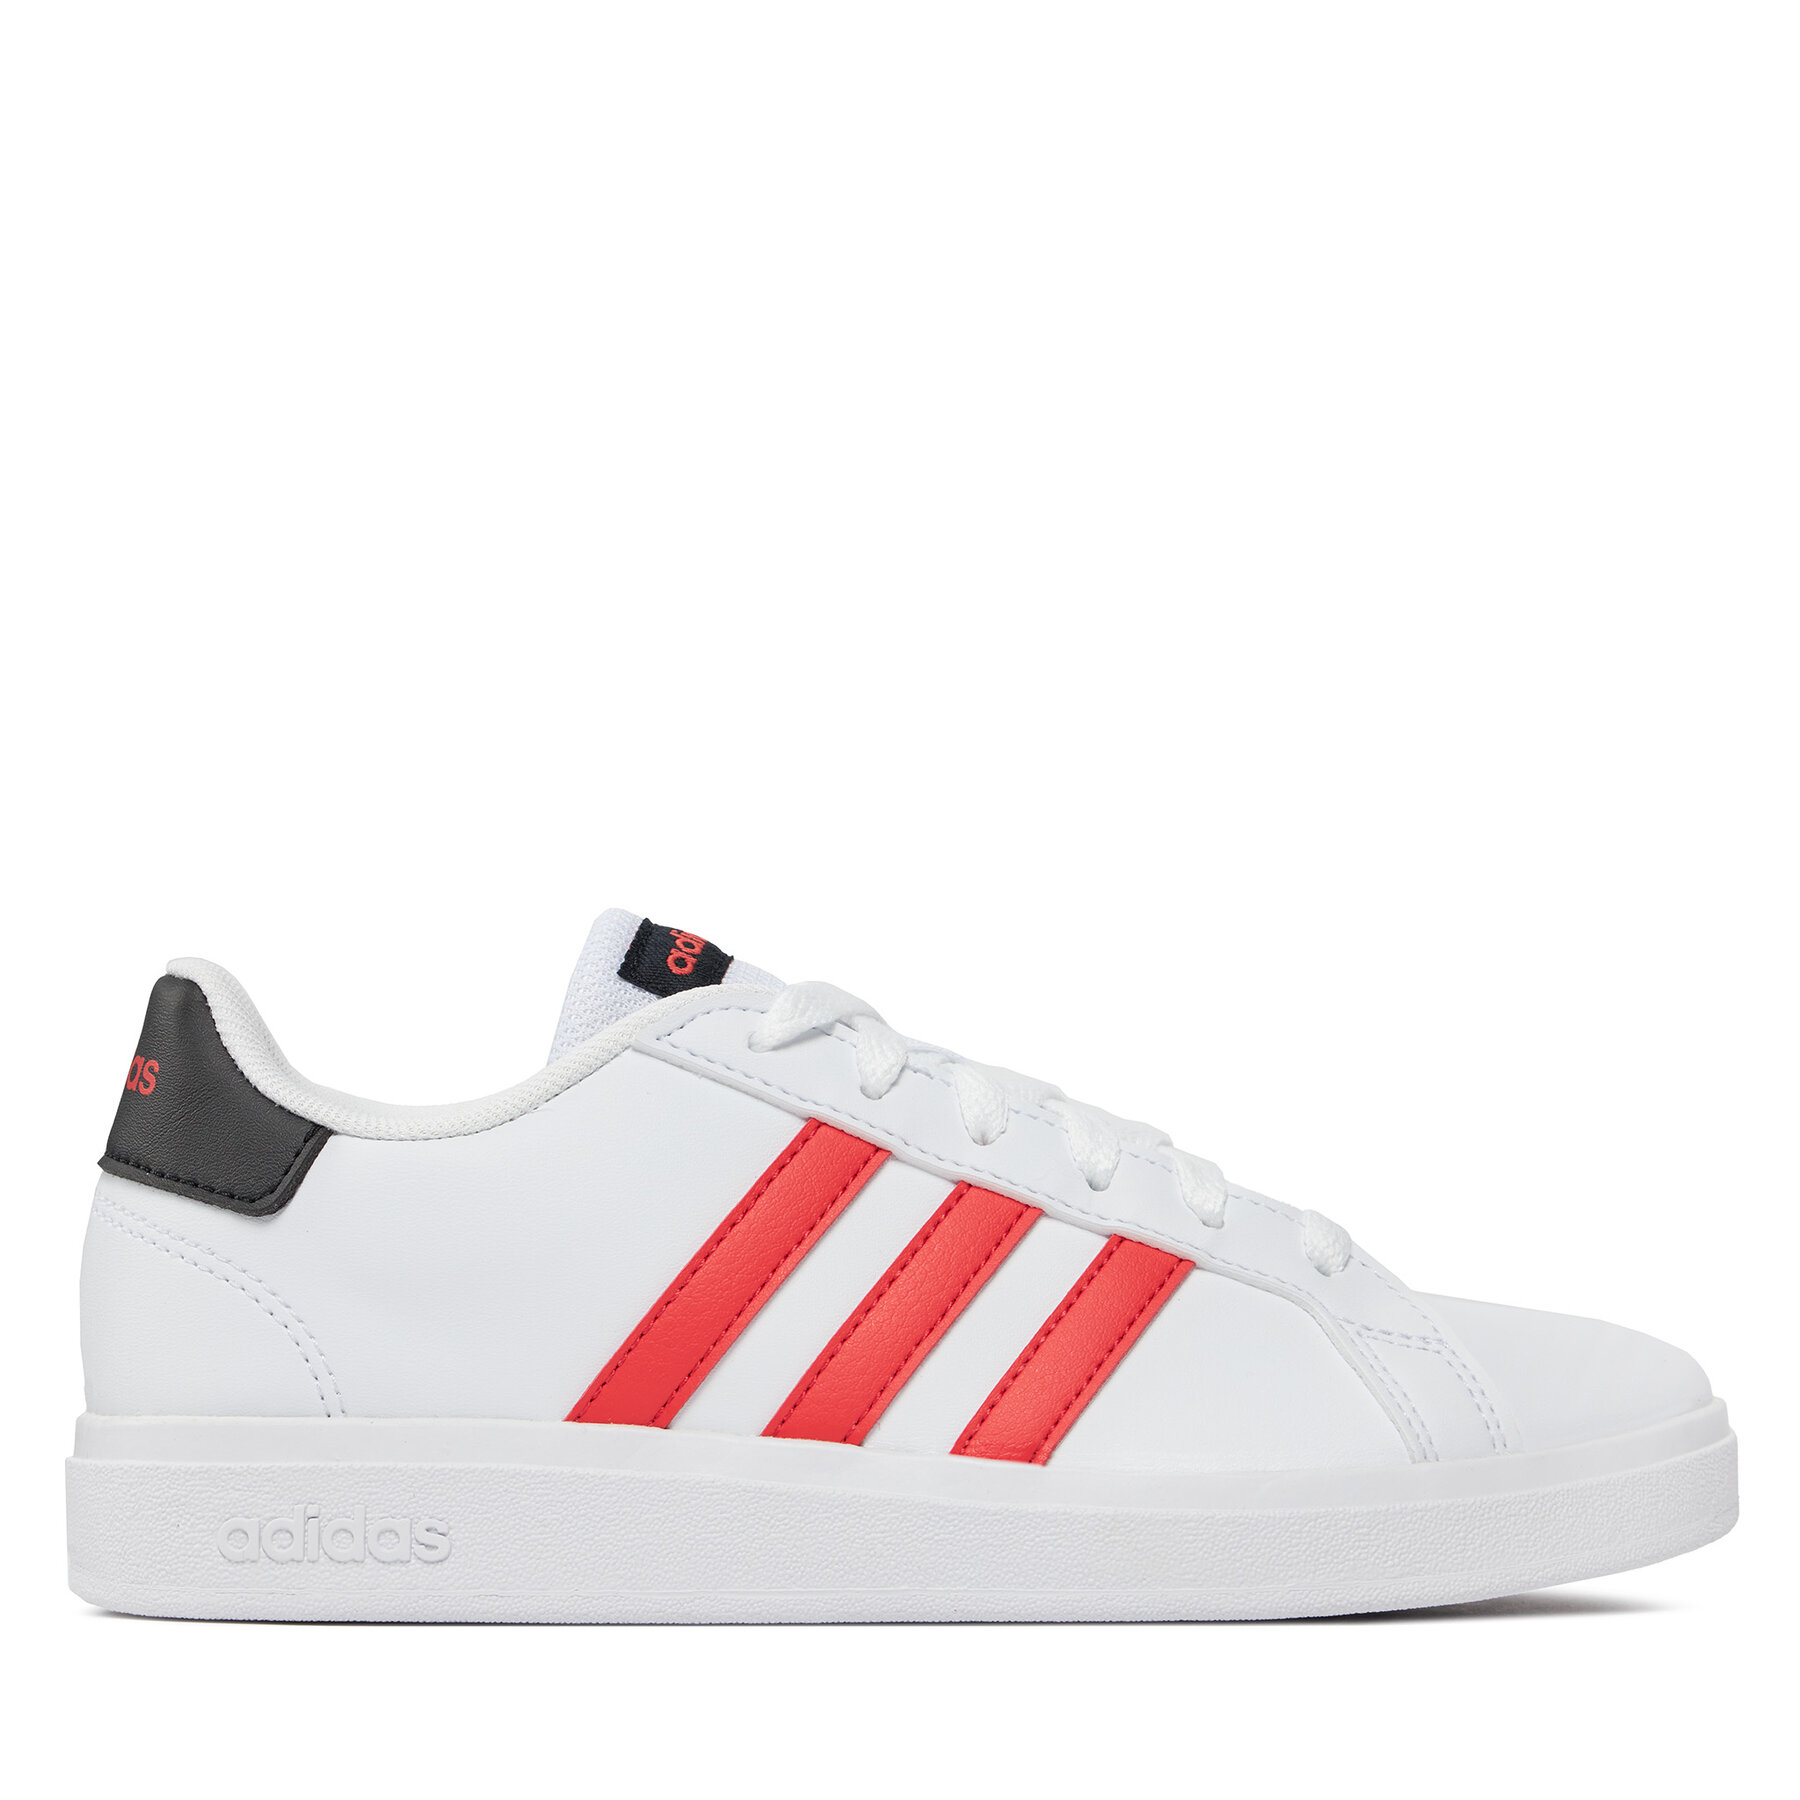 Obuća adidas Grand Court Lifestyle Tennis Lace-Up Shoes IG4828 Ftwwht/Brired/Cblack